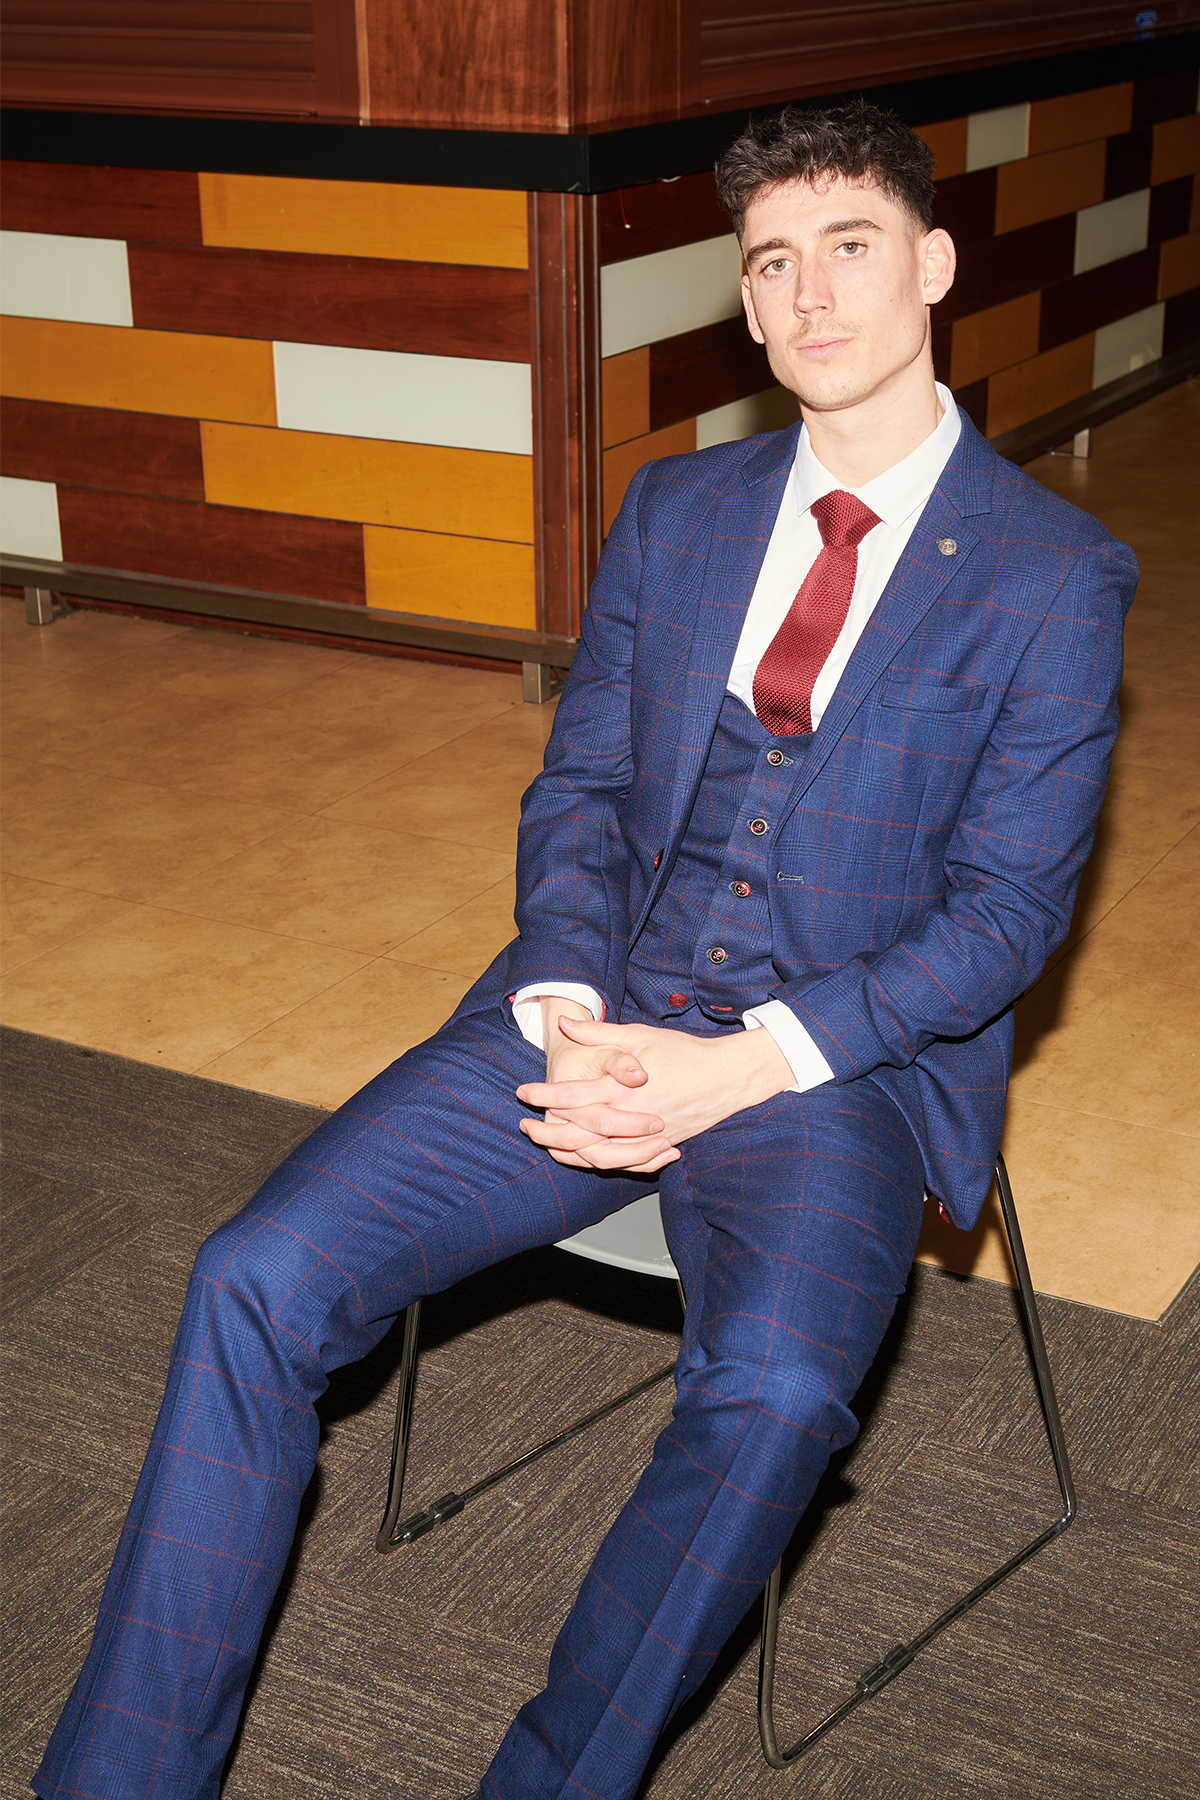 The Cardiff City F.C. Collection - Edinson Navy & Wine Check Suit As Worn By Callum O'Dowda